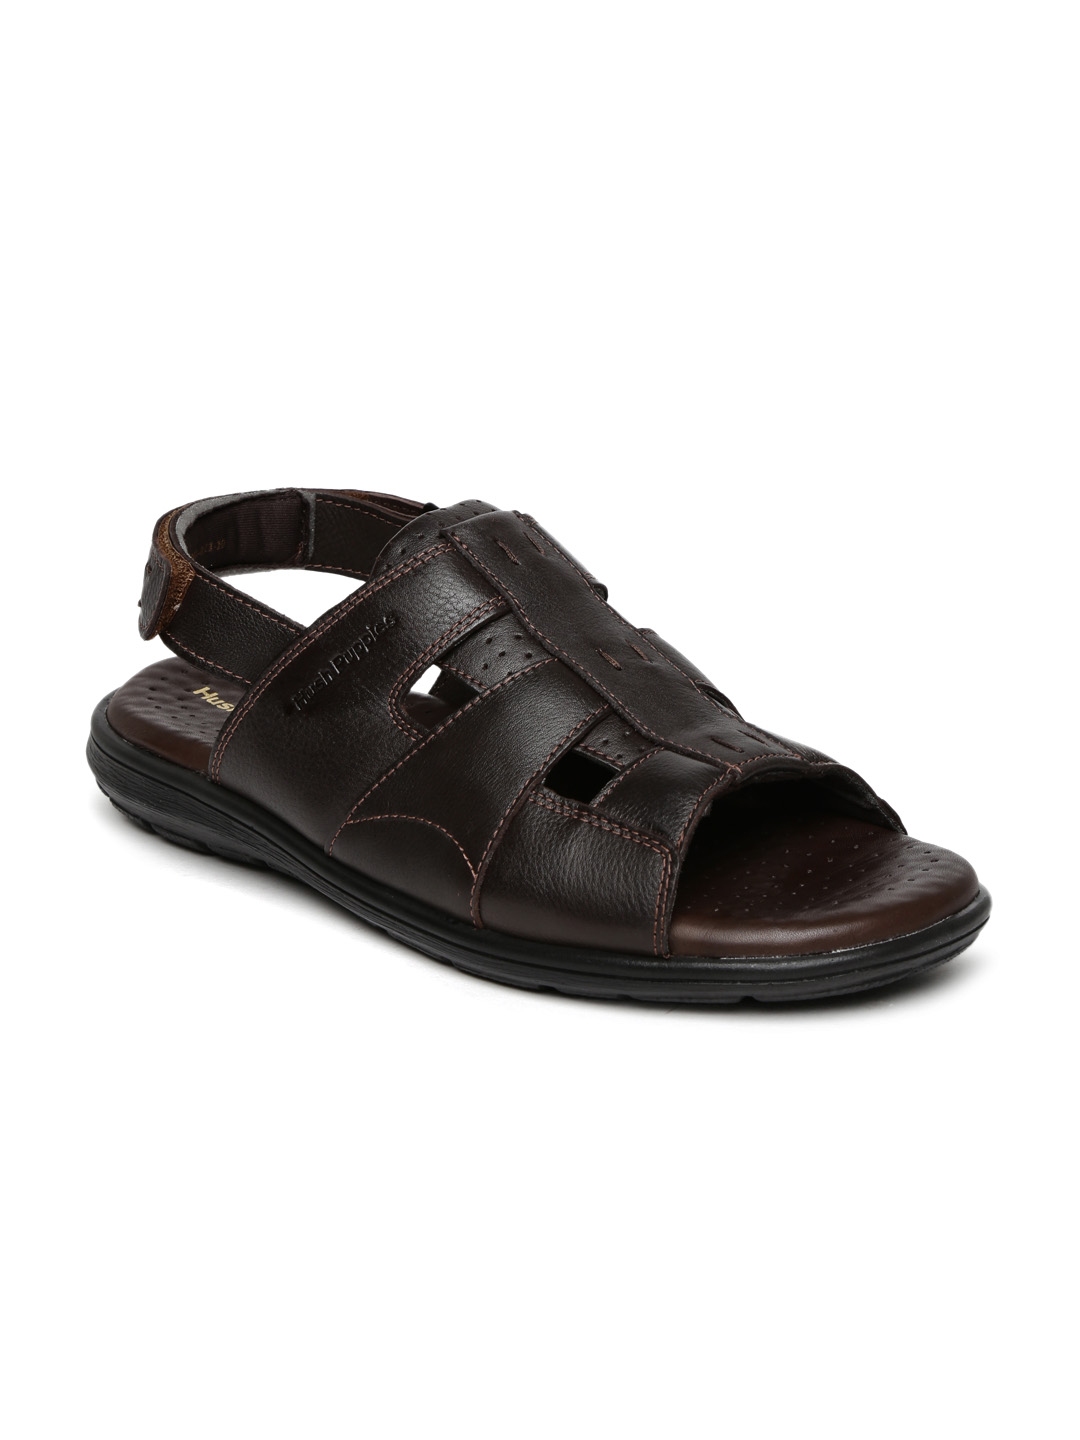 Buy Hush Puppies Men Brown Charles Leather Sandals - Sandals for Men ...